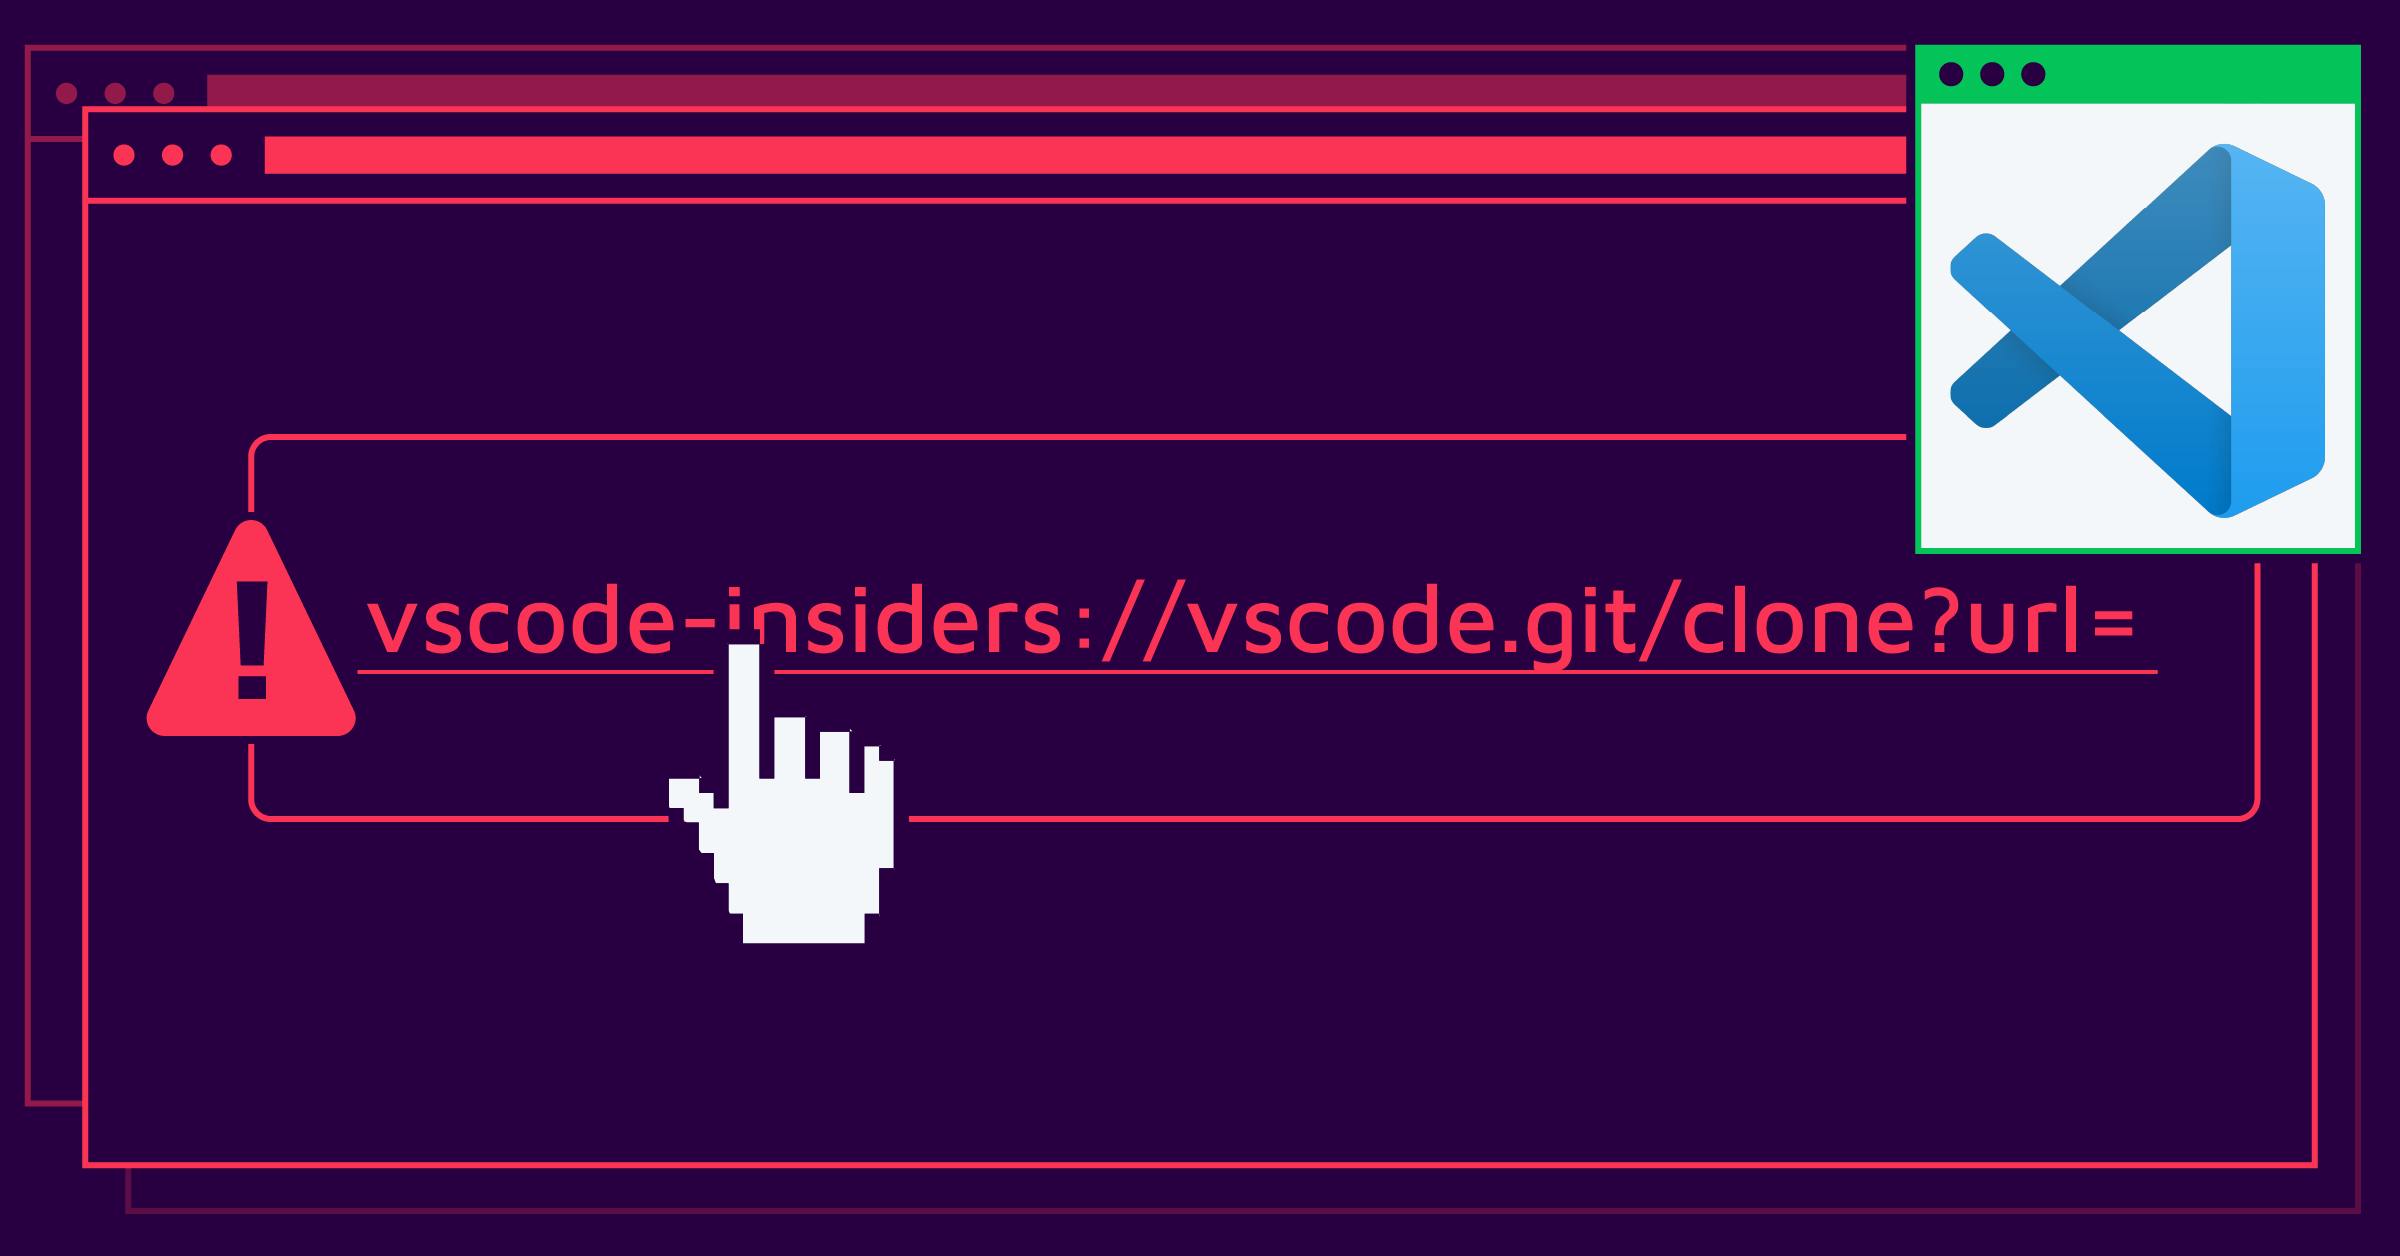 A victim clicks on a malicious link exploiting a vulnerability in Visual Studio Code